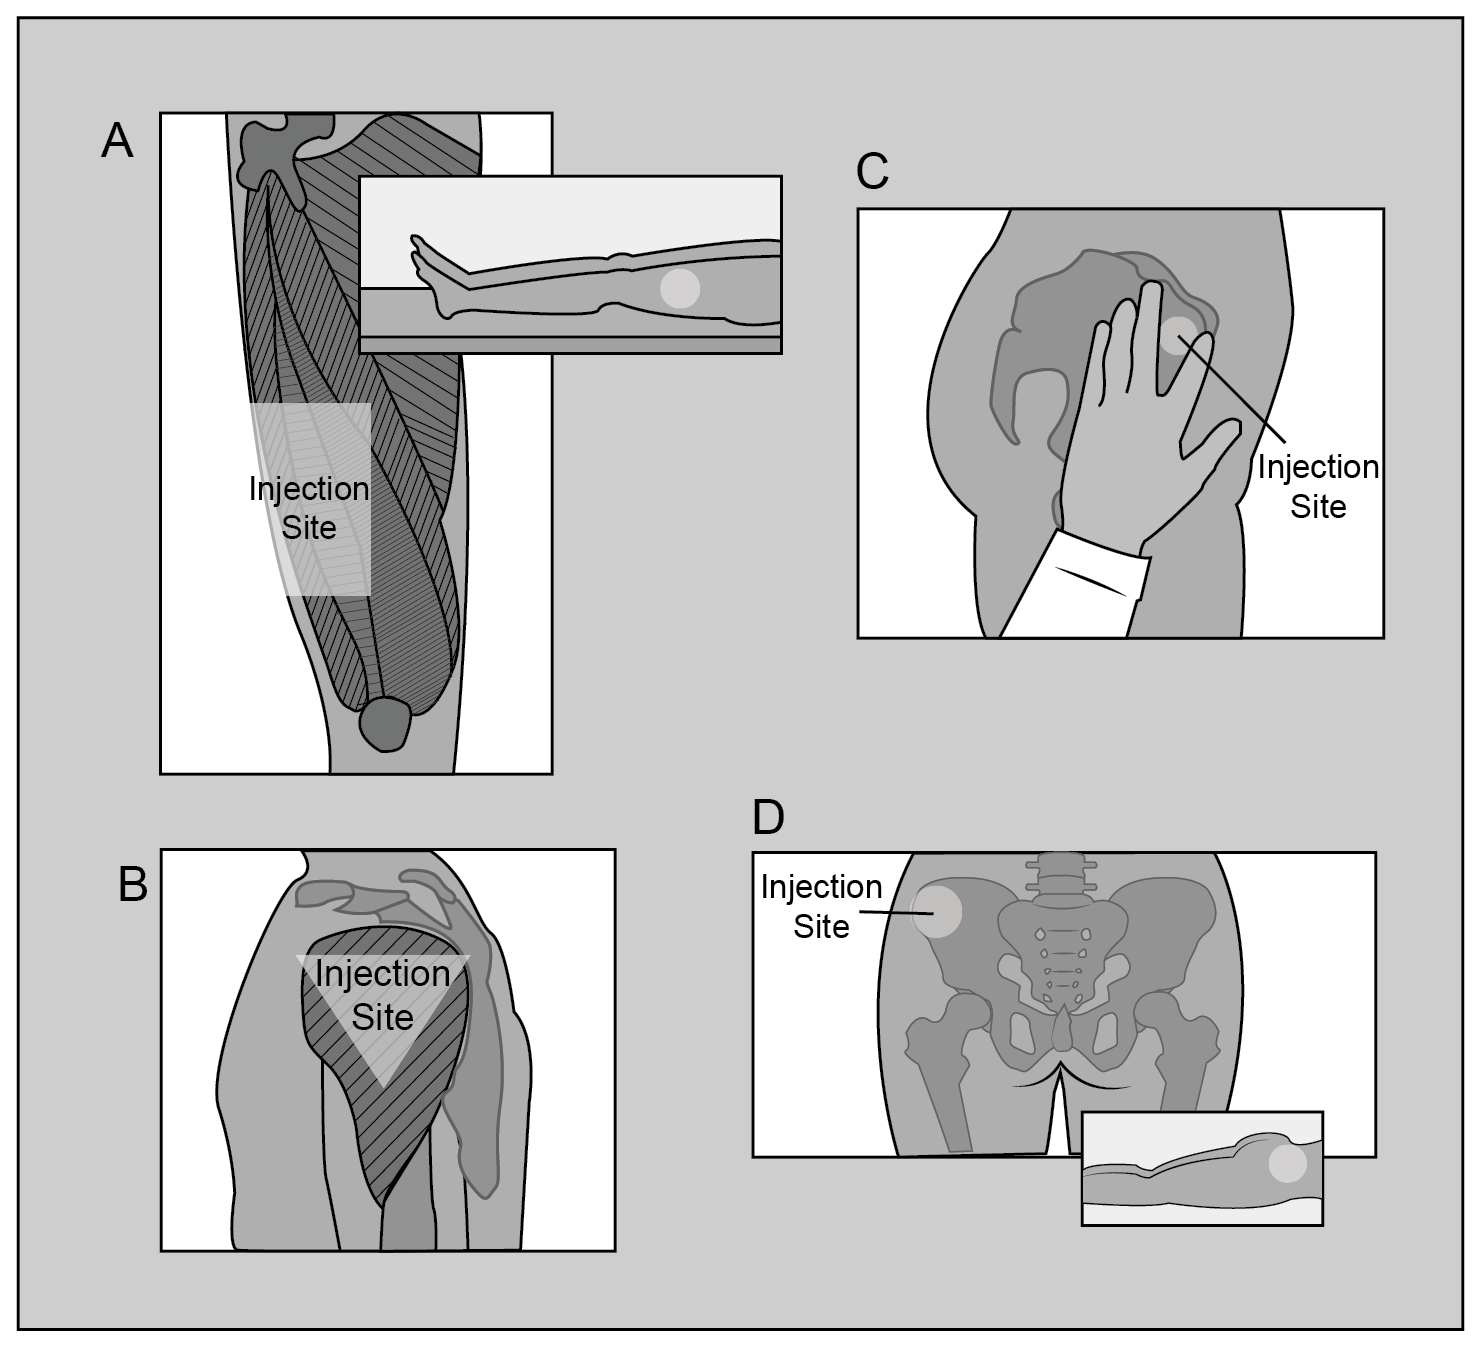 identify each intramuscular injection site on the diagram using the corresponding letter.